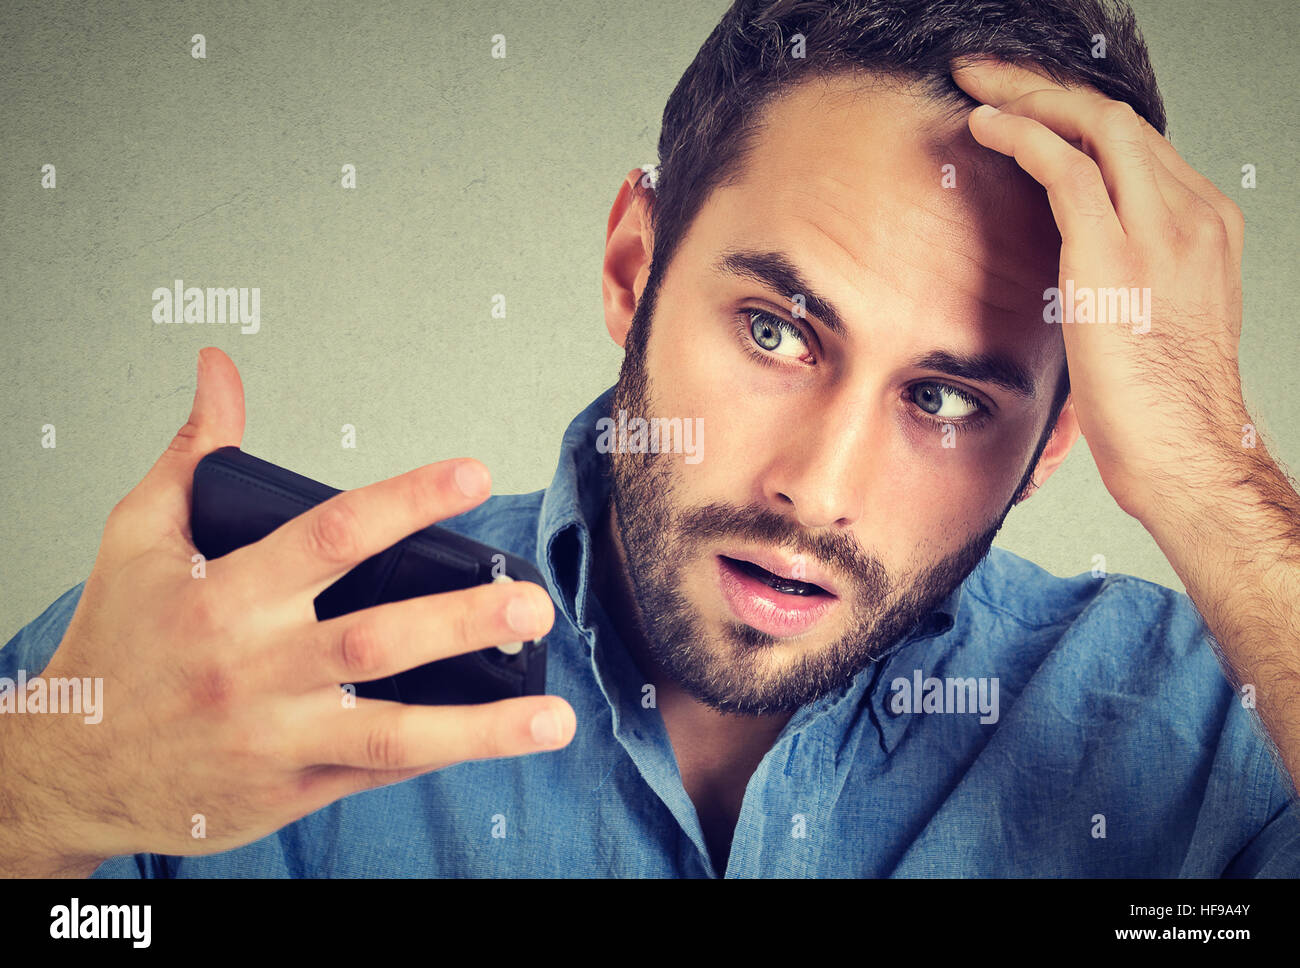 Preoccupied shocked man feeling head, surprised he is losing hair, receding hairline, bad news isolated on gray background. Negative facial expression Stock Photo